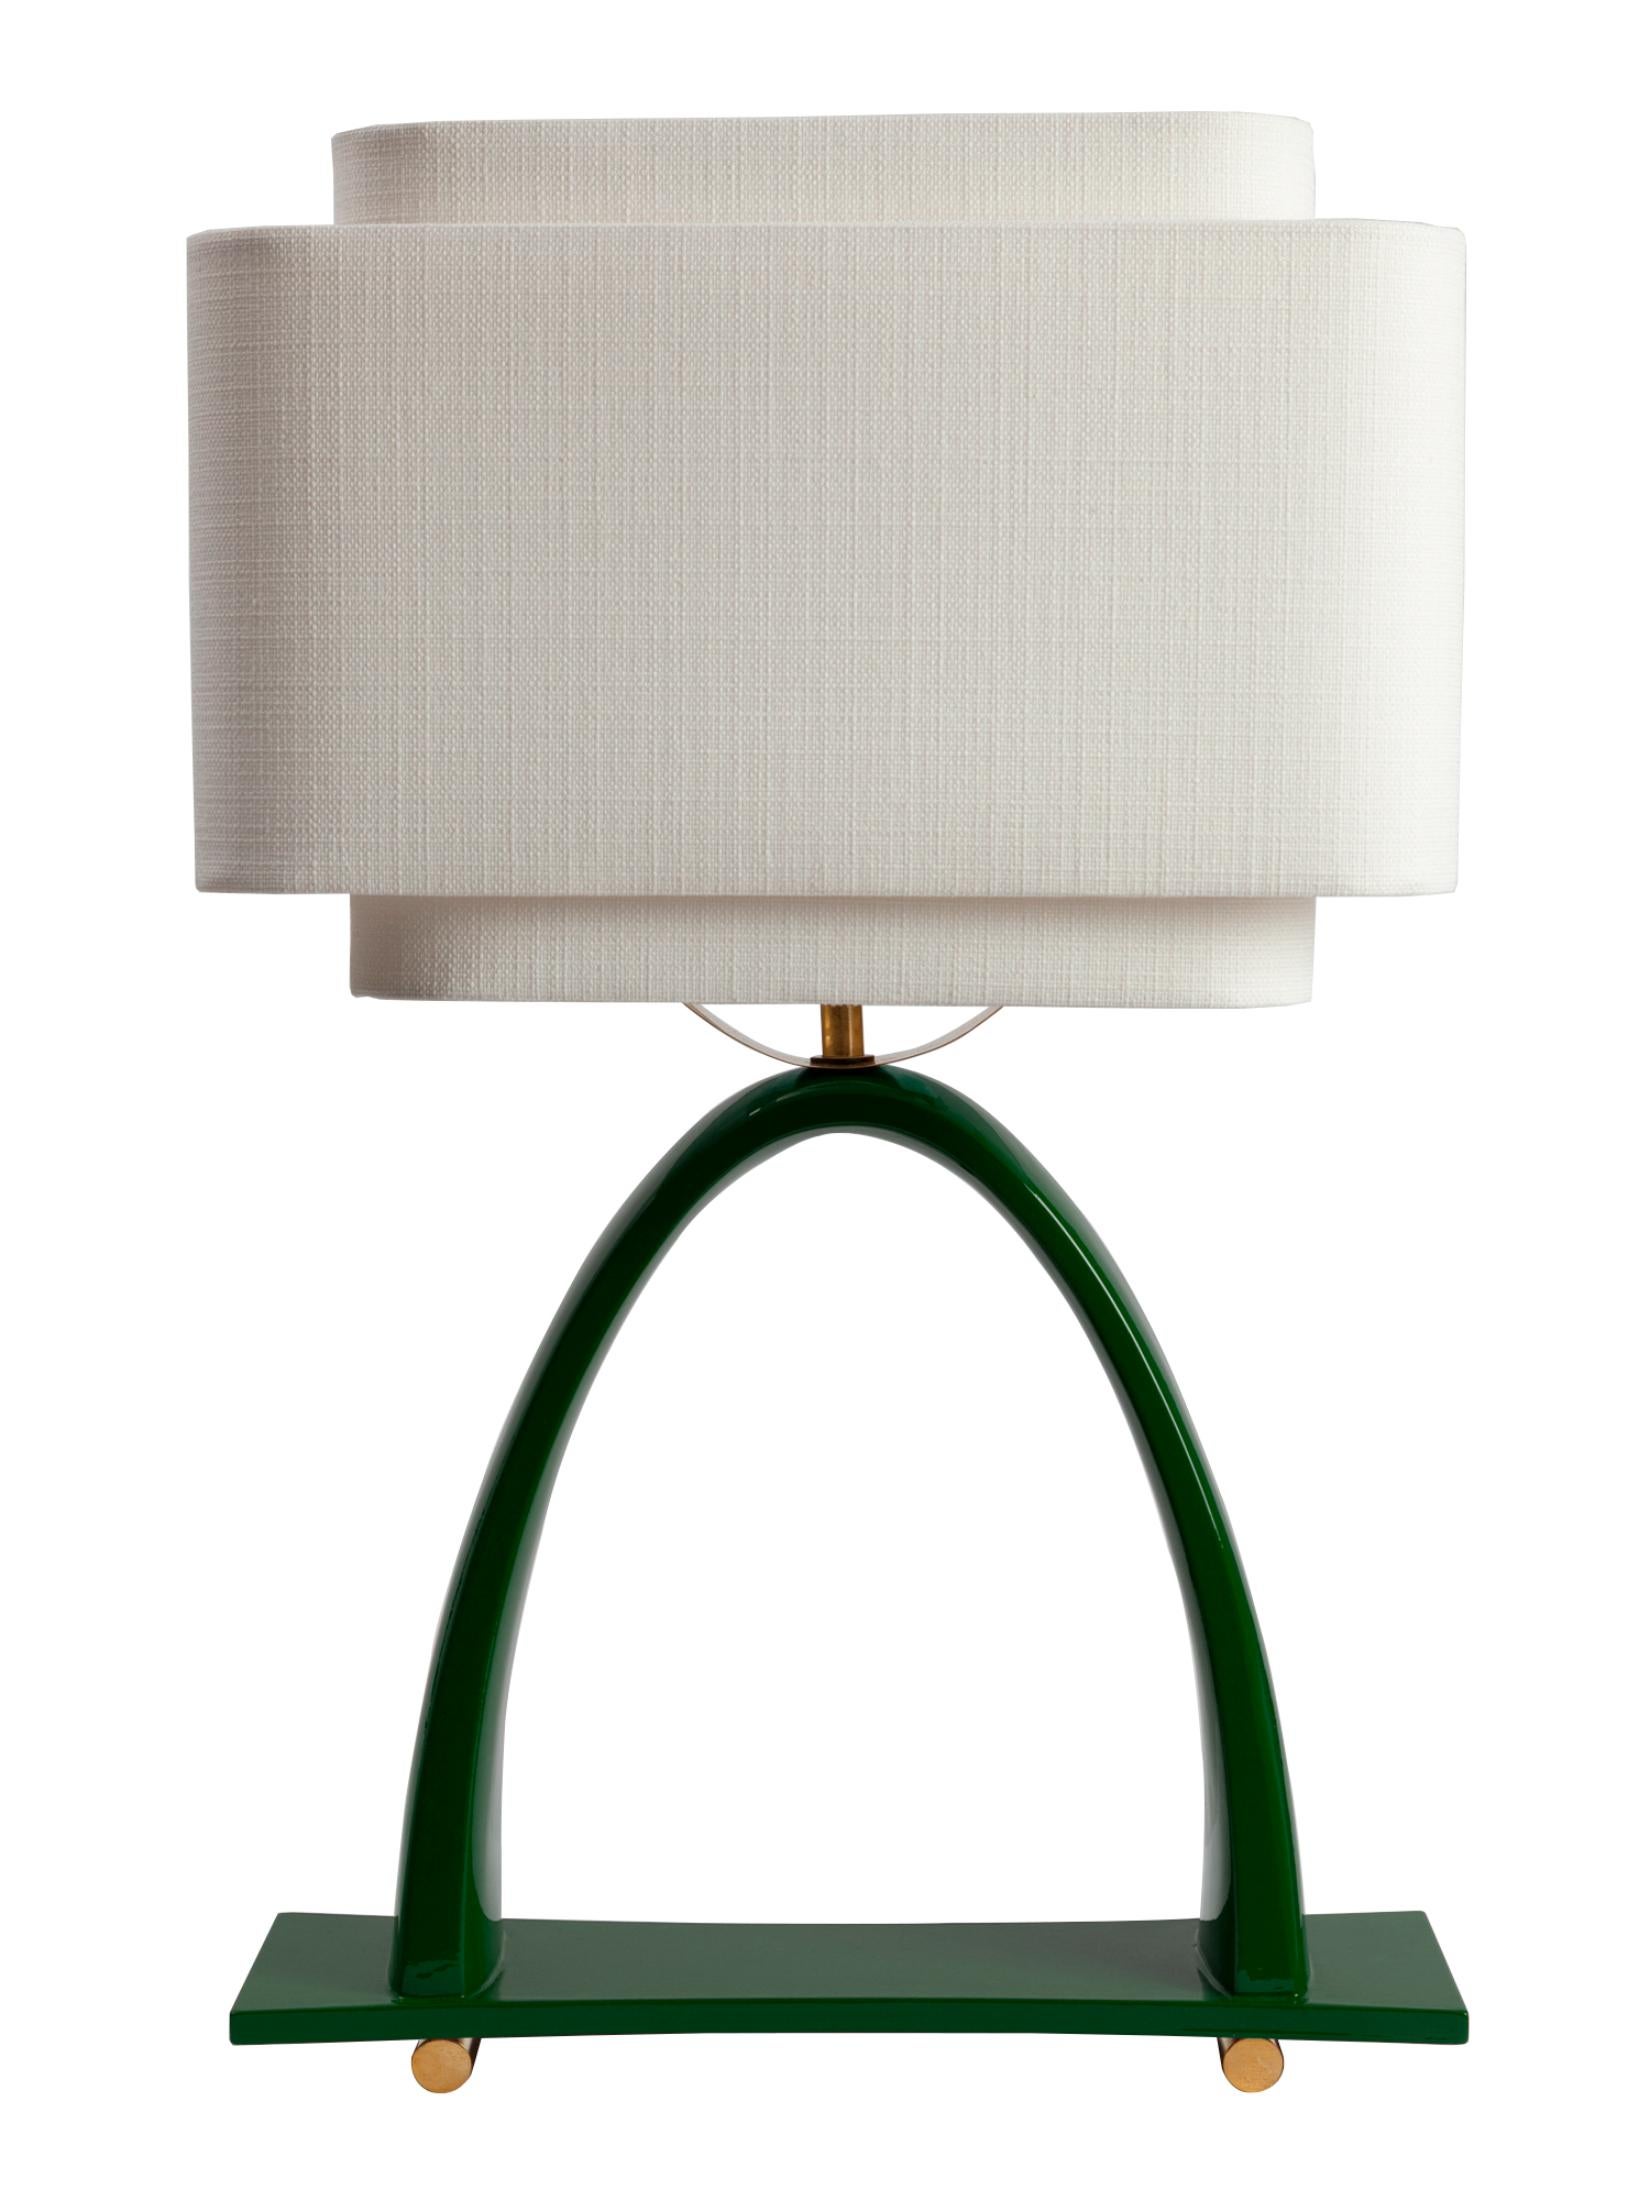 Yoshiko Table Lamp by Kira Design
Dimensions: ⌀ 37 x H 58 cm
Materials: Ceramic, Linen, Brass, Lacquered Wood
Available Colors: Blue, Red, Green, Black.

The Yoshiko desk lamp reveals delicate, slender curves, counterbalanced by a double shade that